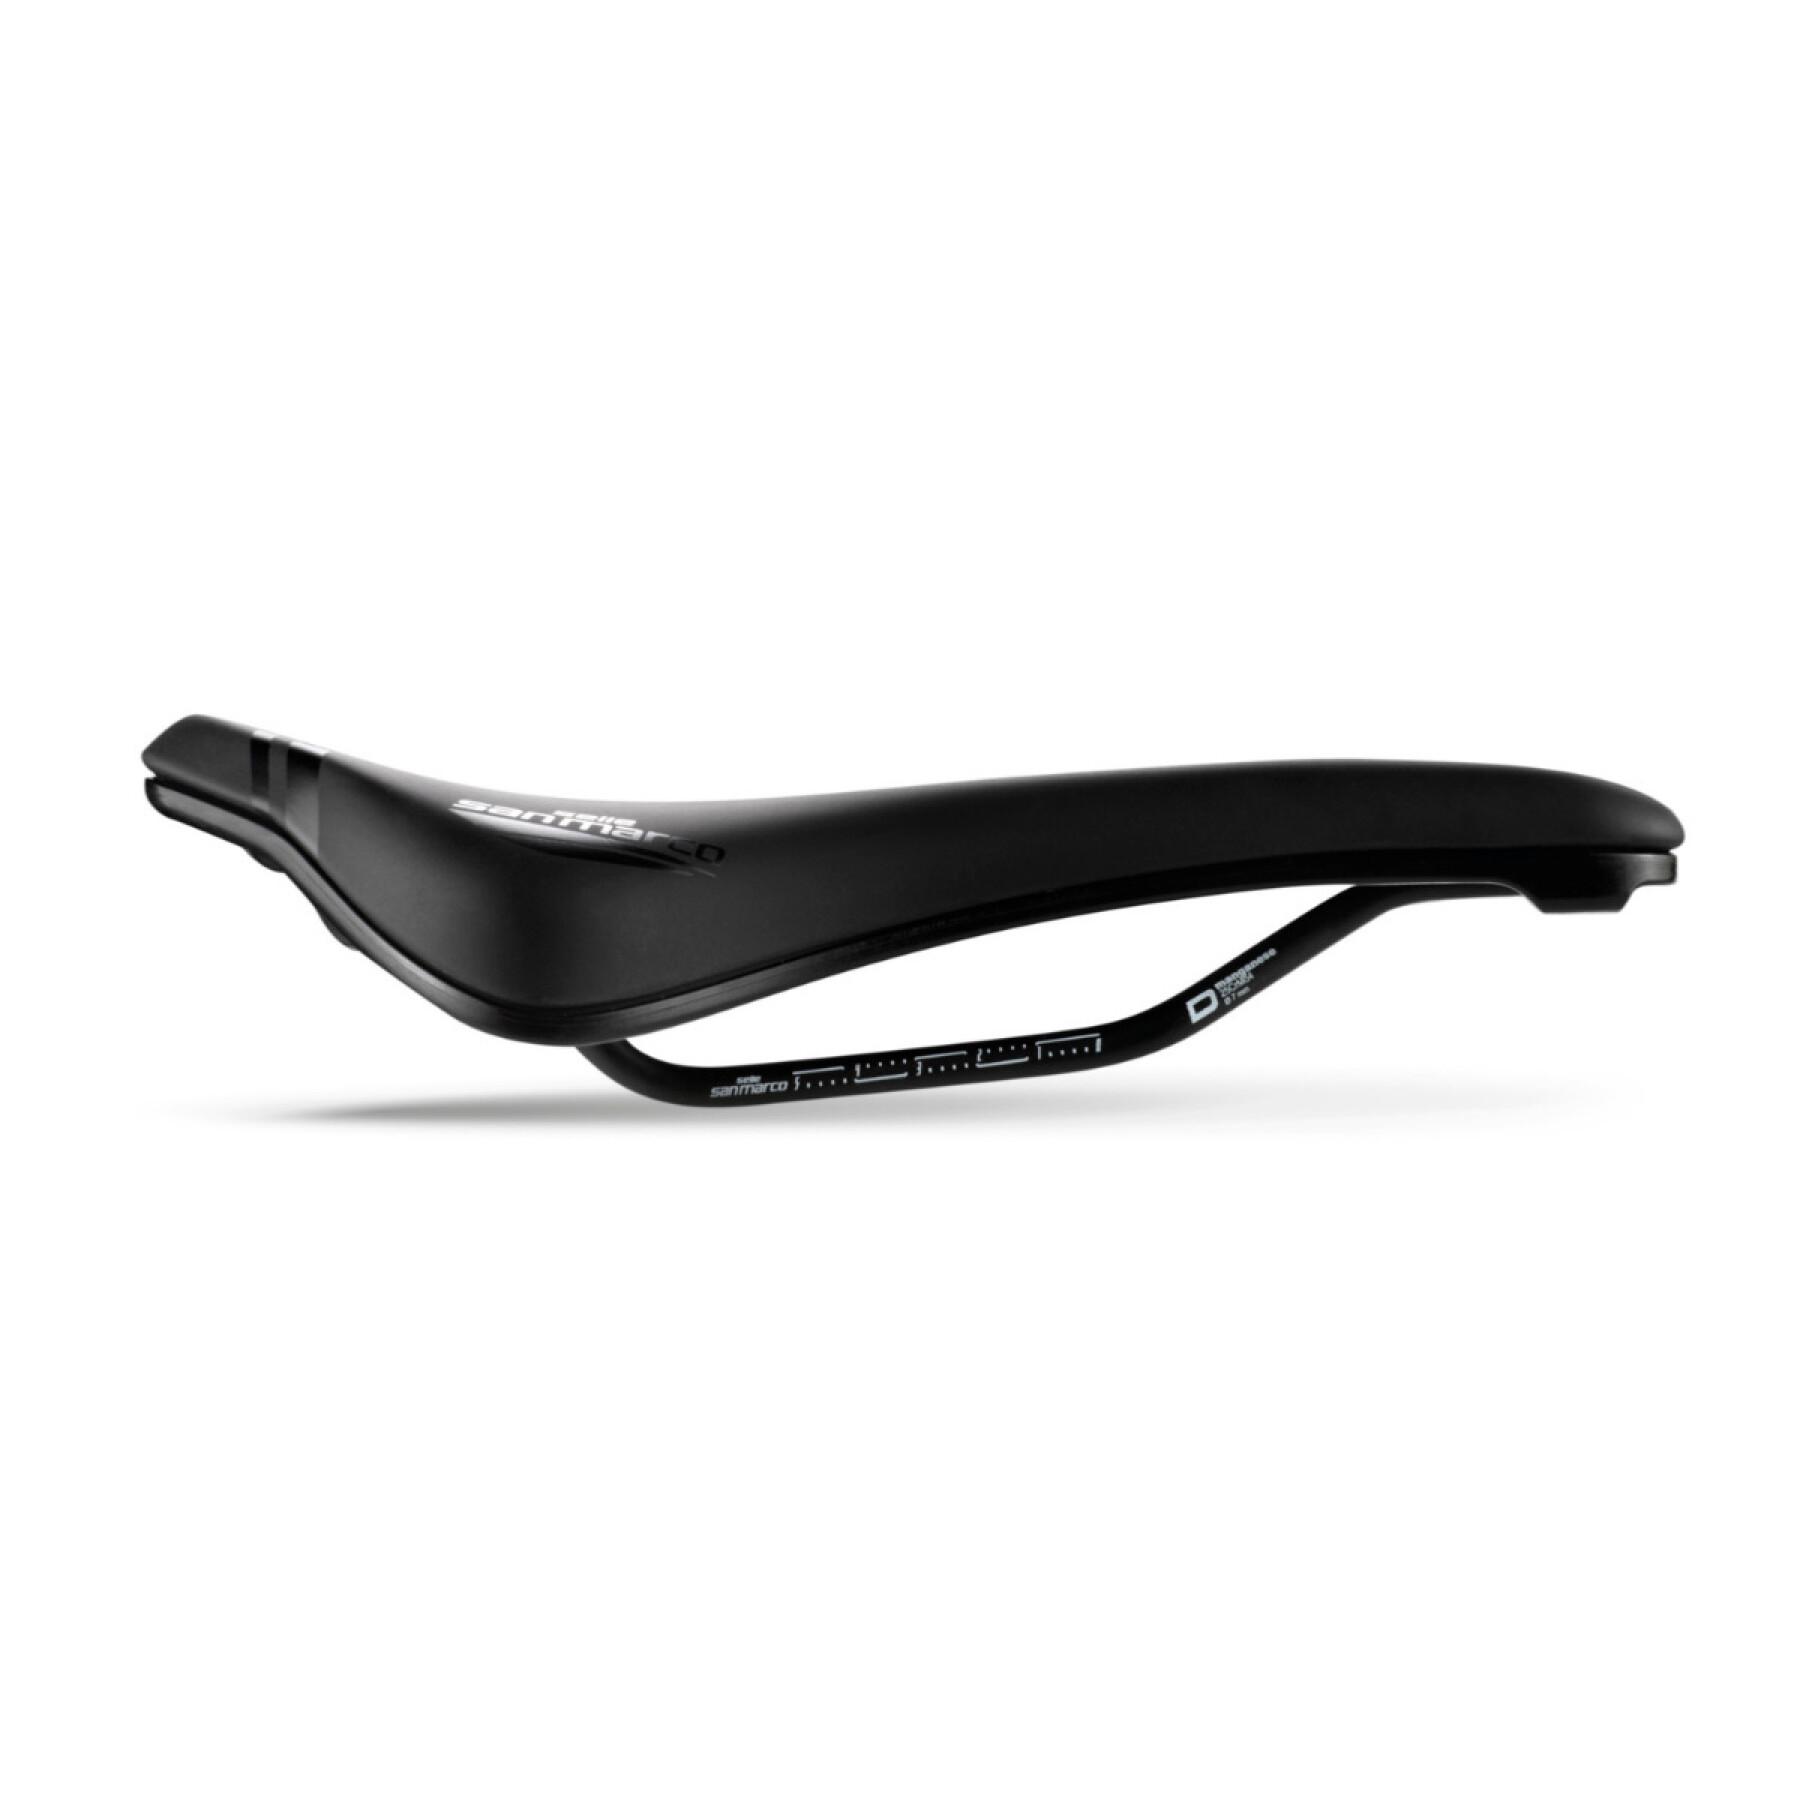 Saddle Selle San Marco Ground Short Open-Fit Dynamic